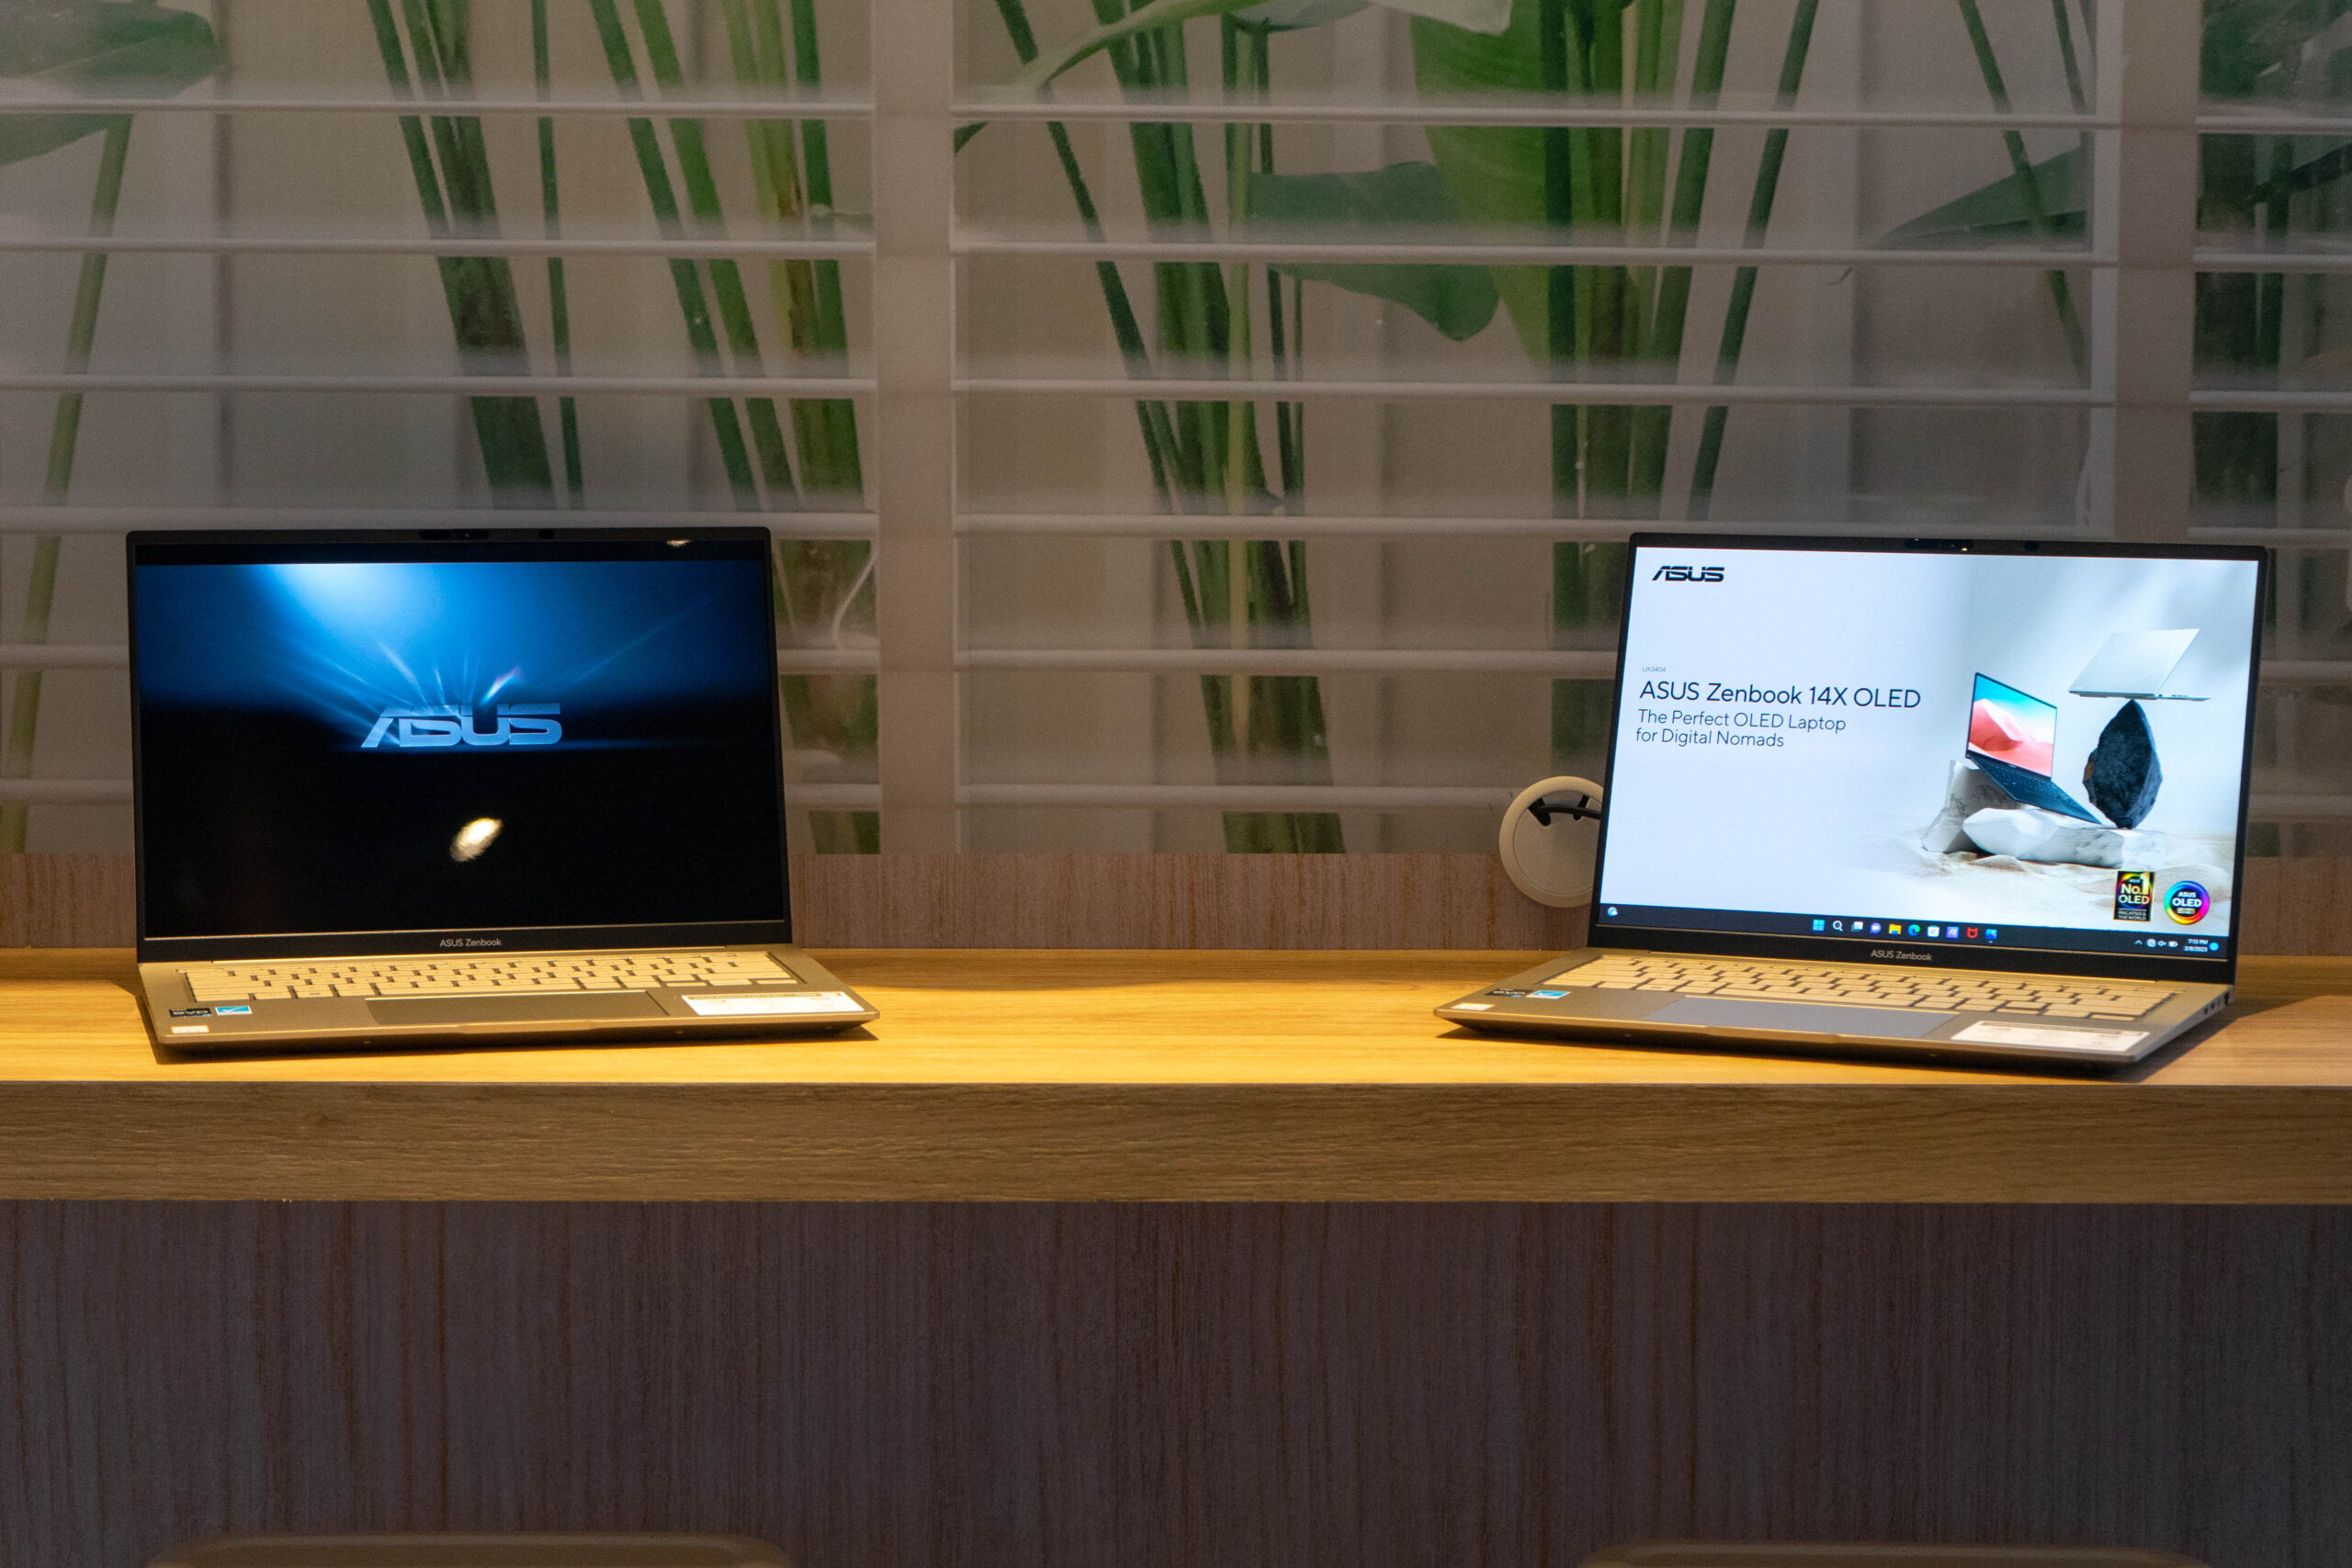 ASUS Officially Launches Zenbook 14X OLED & Zenbook 14 Flip OLED in Malaysia